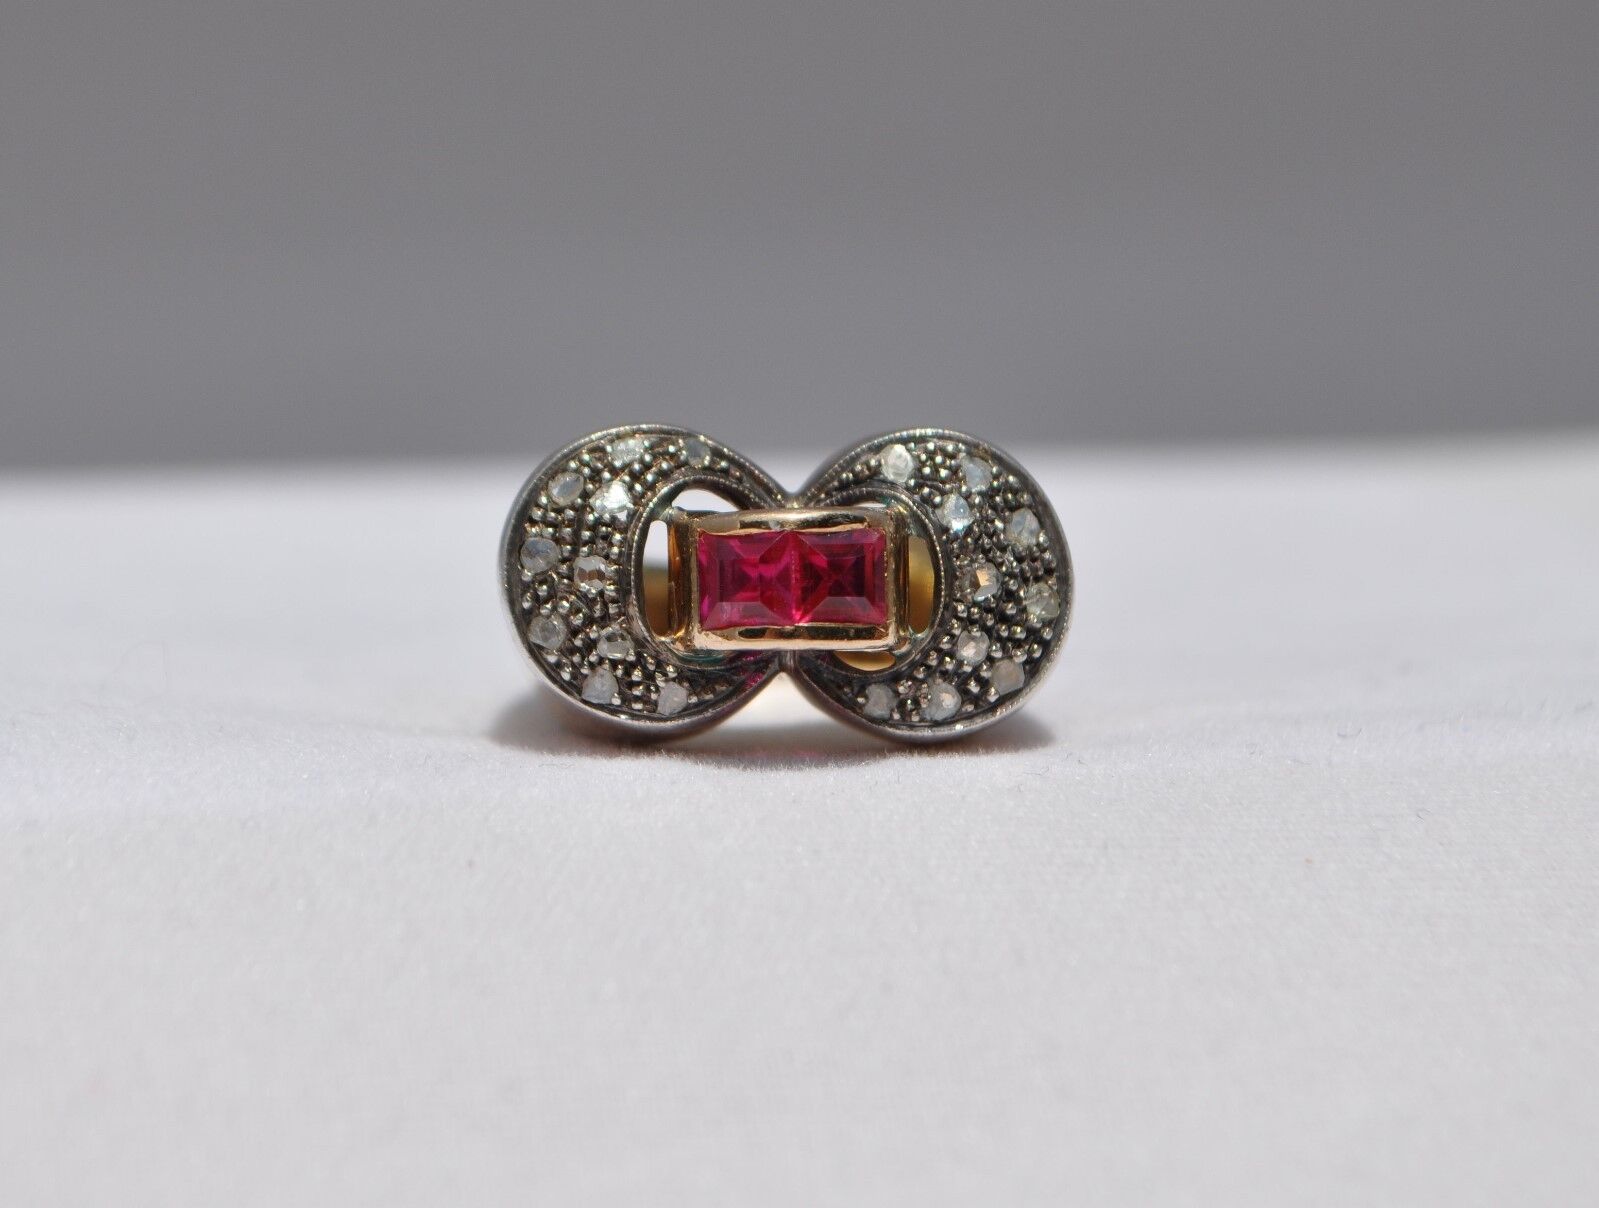 ANTIQUE OLD 1800S FRENCH EUROPEAN RING 18K SOLID GOLD PLATINUM - DIAMONDS RUBY 